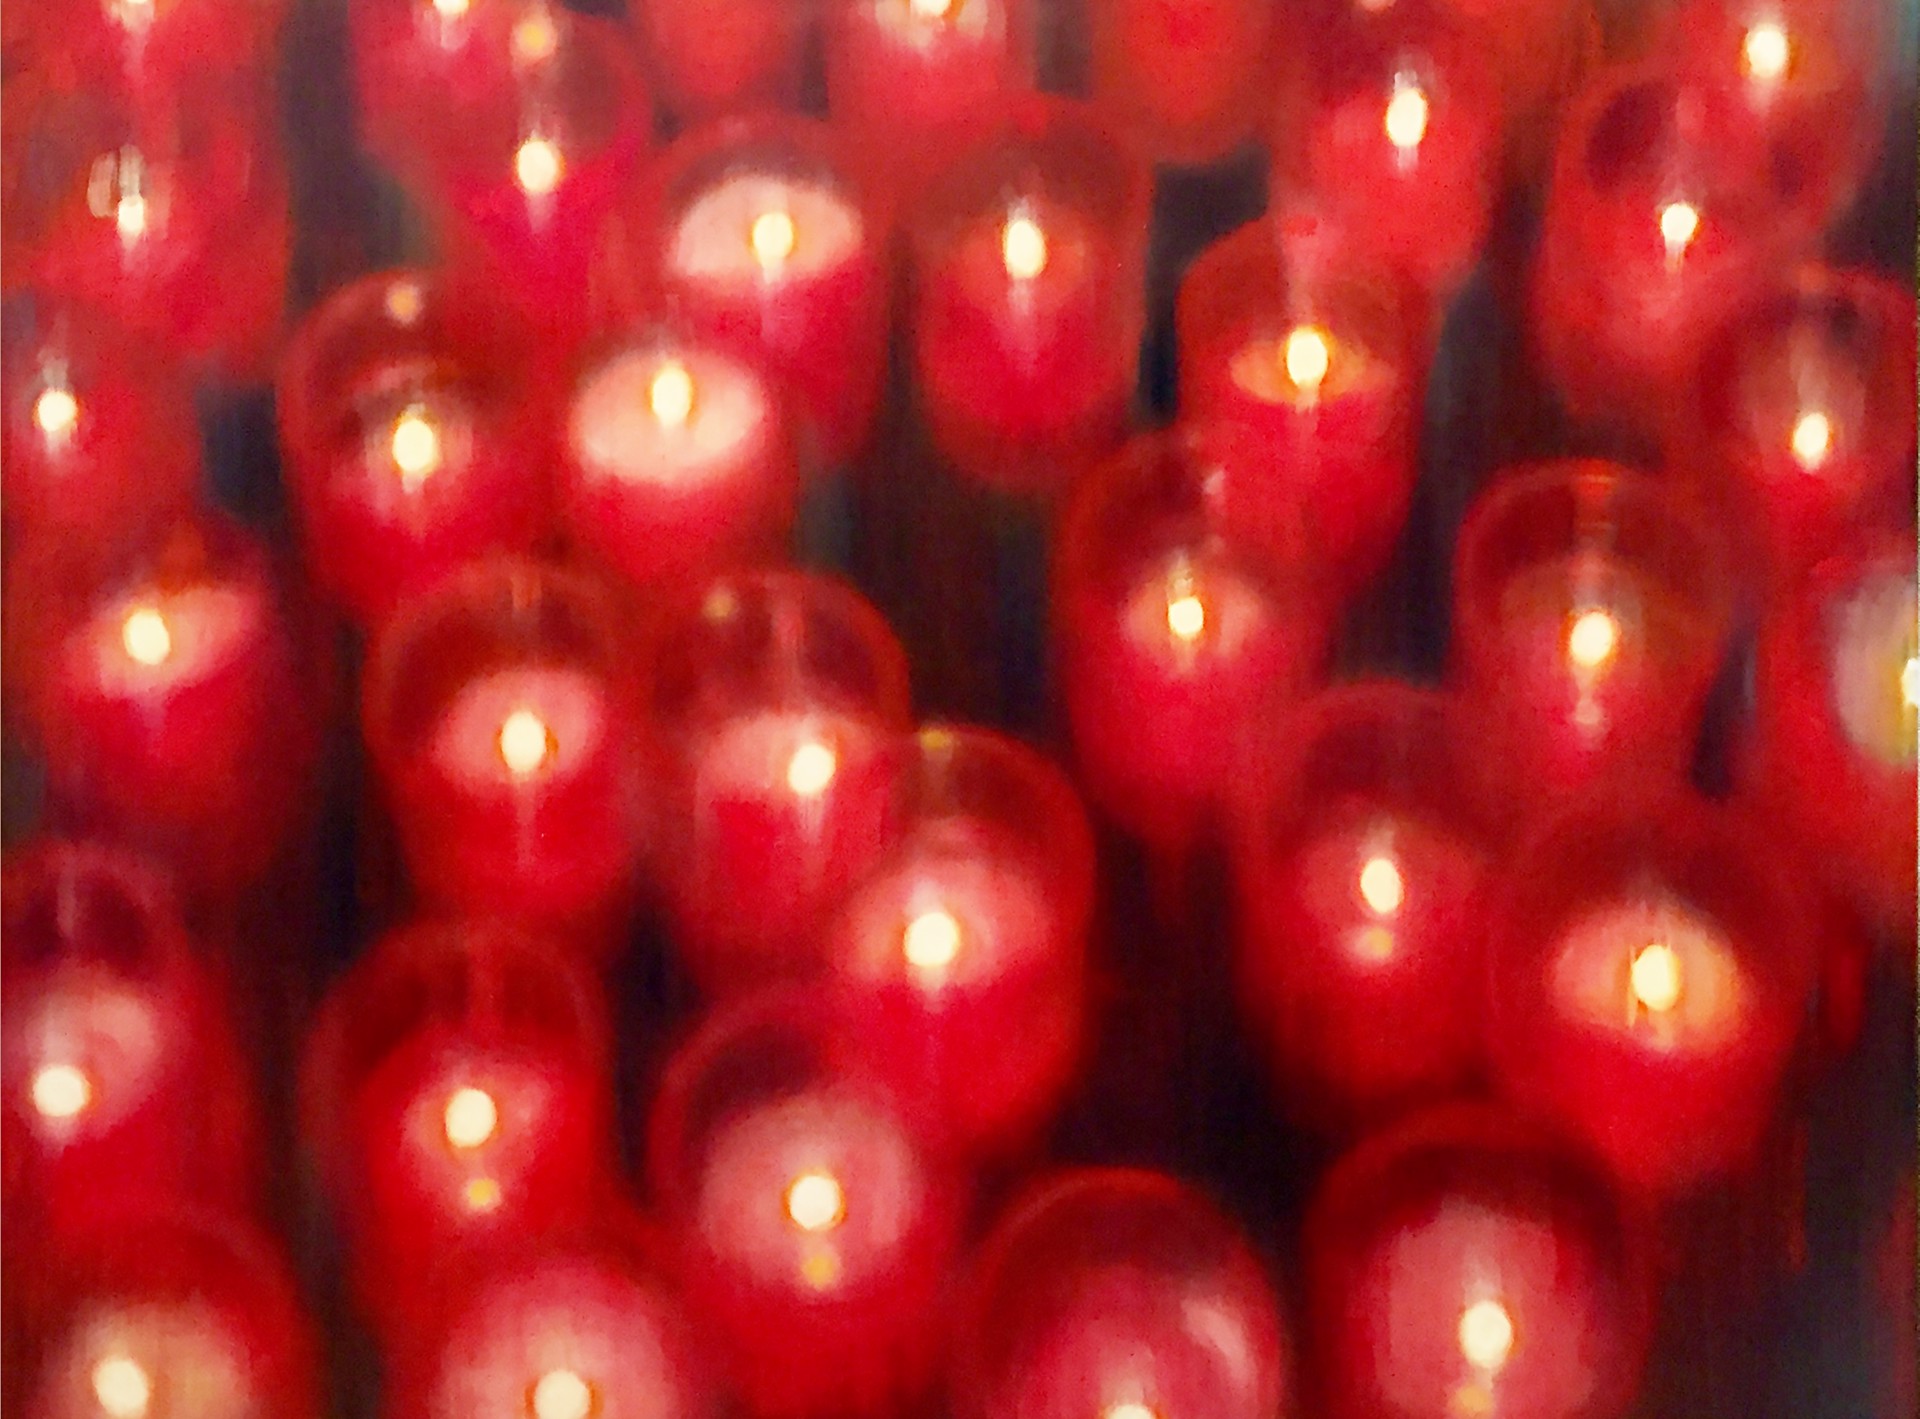 Red Candles by Valentin Popov